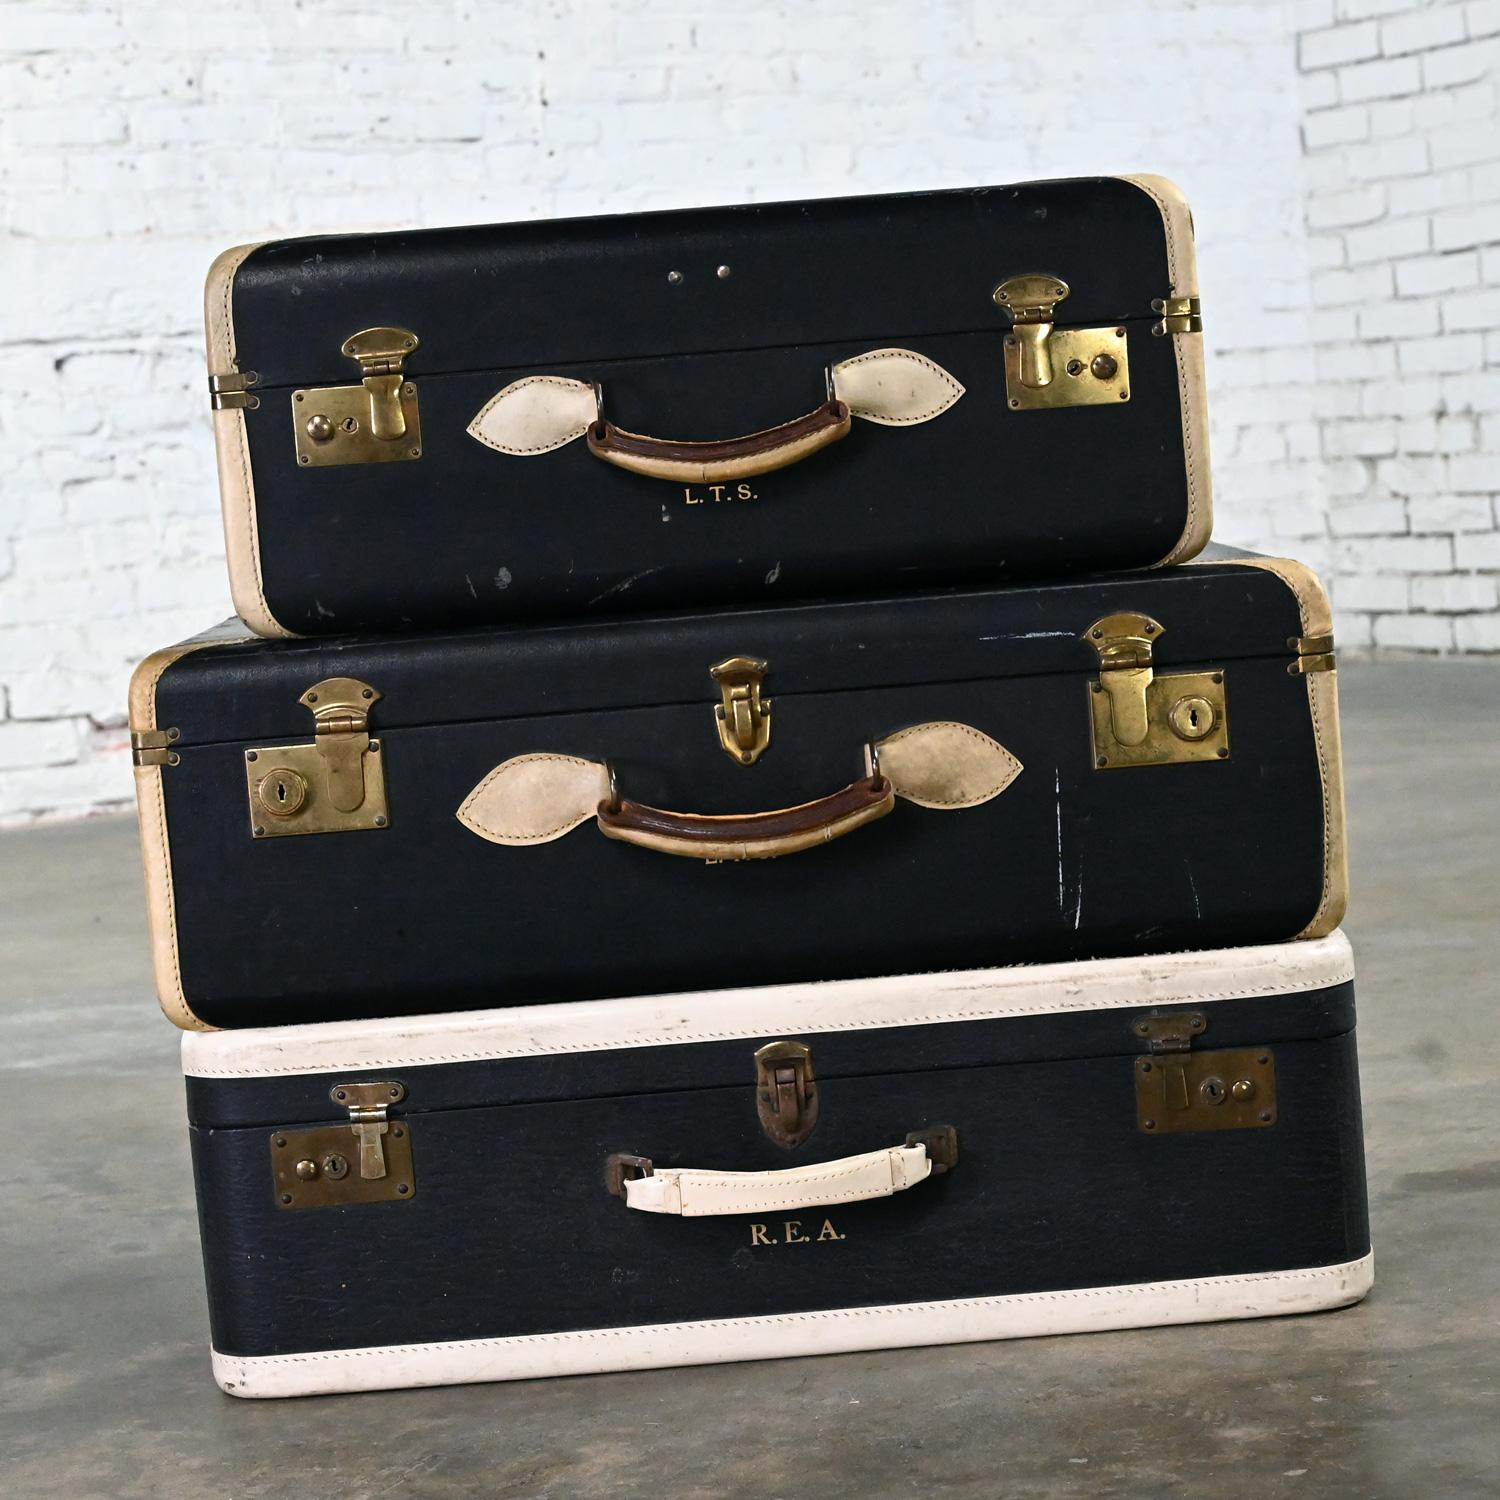 Handsome vintage Boho Chic luggage suitcase end or side table or décor comprised of black & white leather, plastic, and brass plated hardware & handles and blue fabric interiors.  Beautiful condition, keeping in mind that these are vintage and not